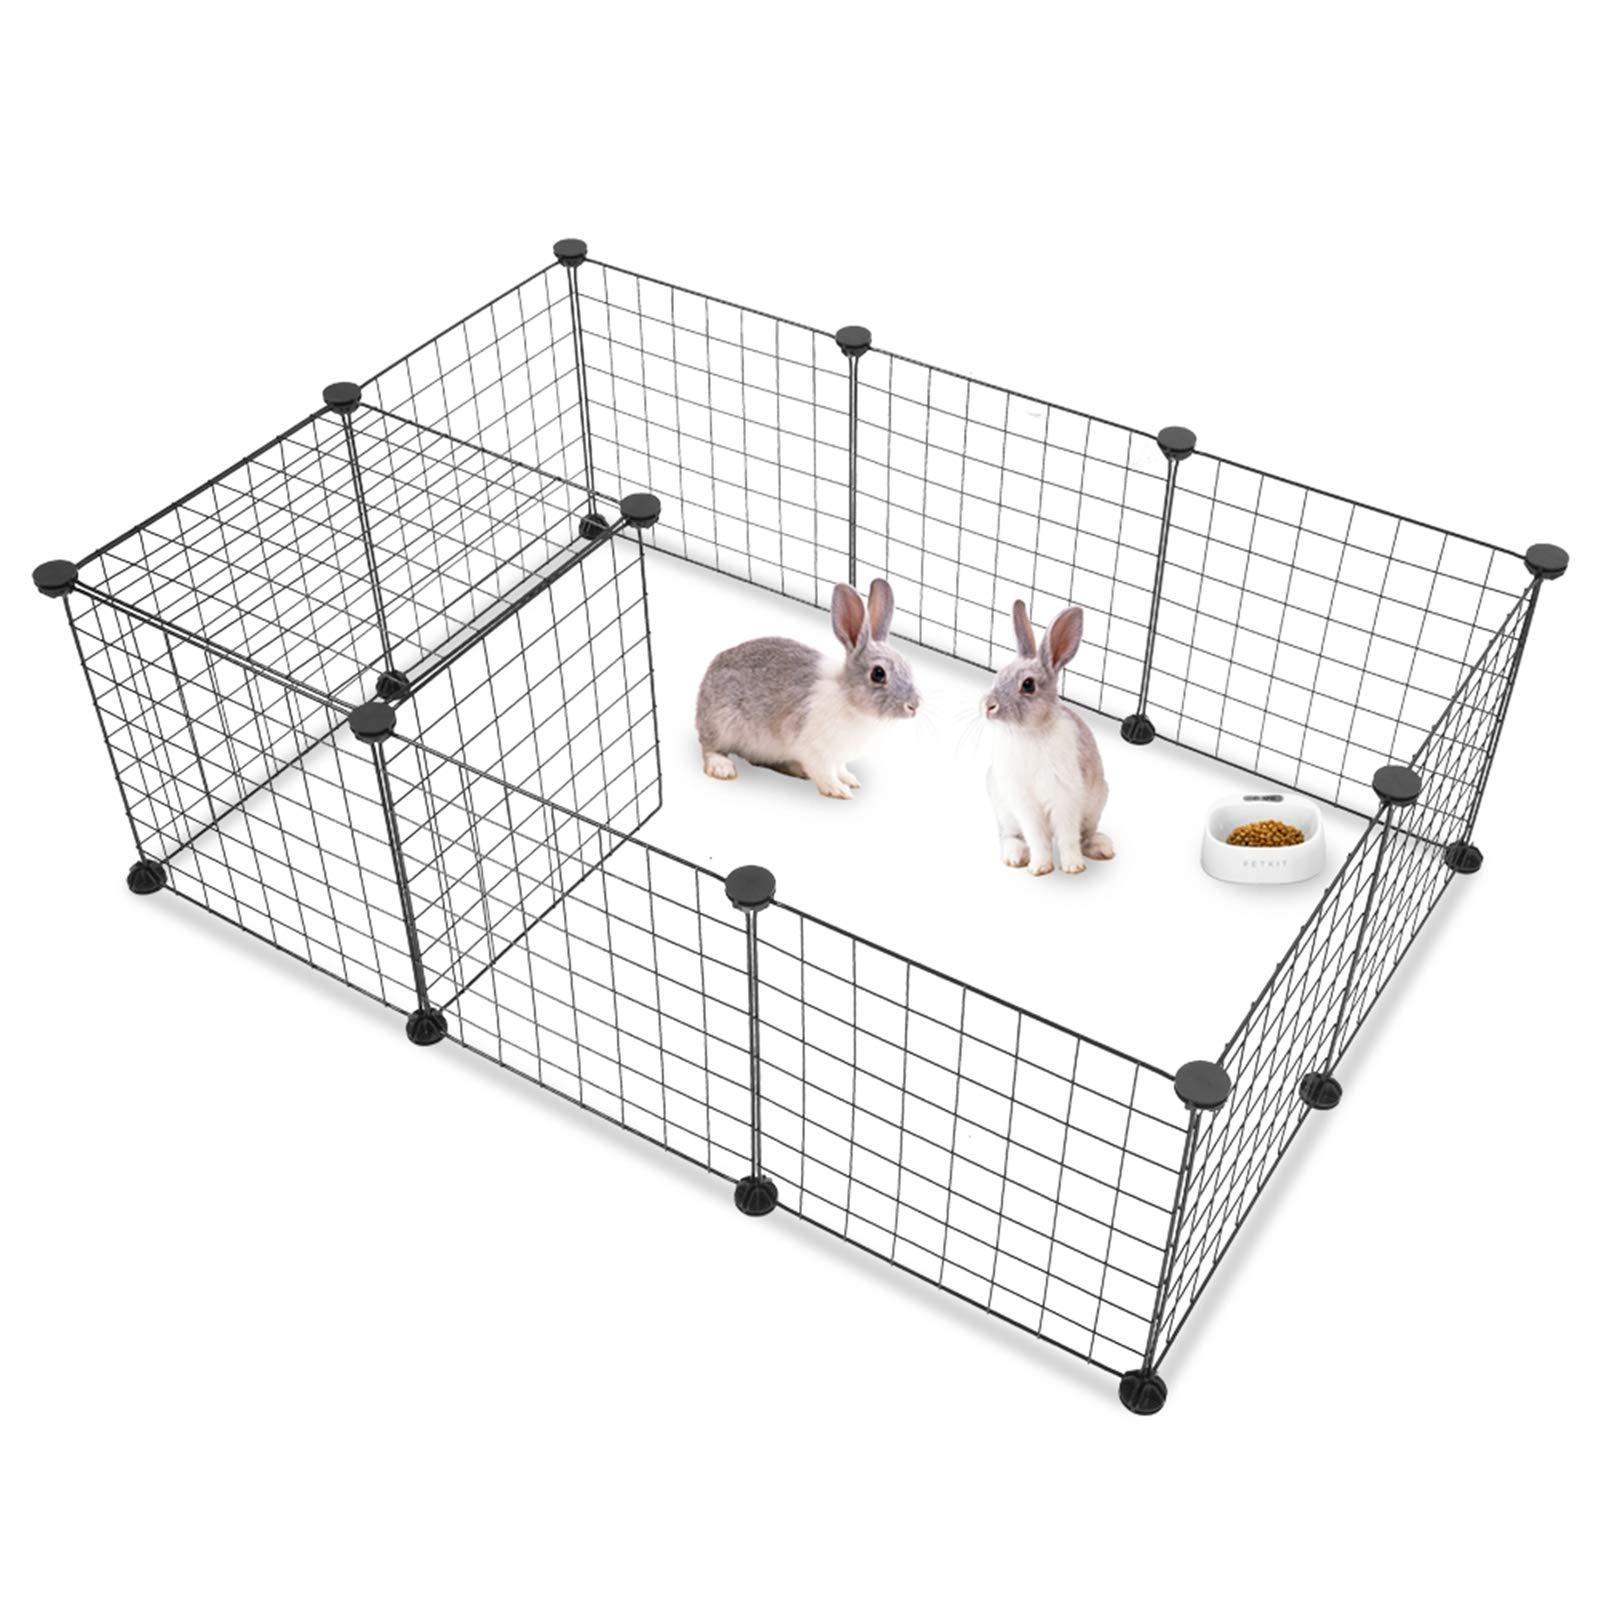 Wistore Pet Playpen, Small Animal Cage Indoor Portable Metal Wire Yard Fence for Small Animals, Guinea Pigs, Rabbits Kennel Crate Fence Tent, Black, PP04